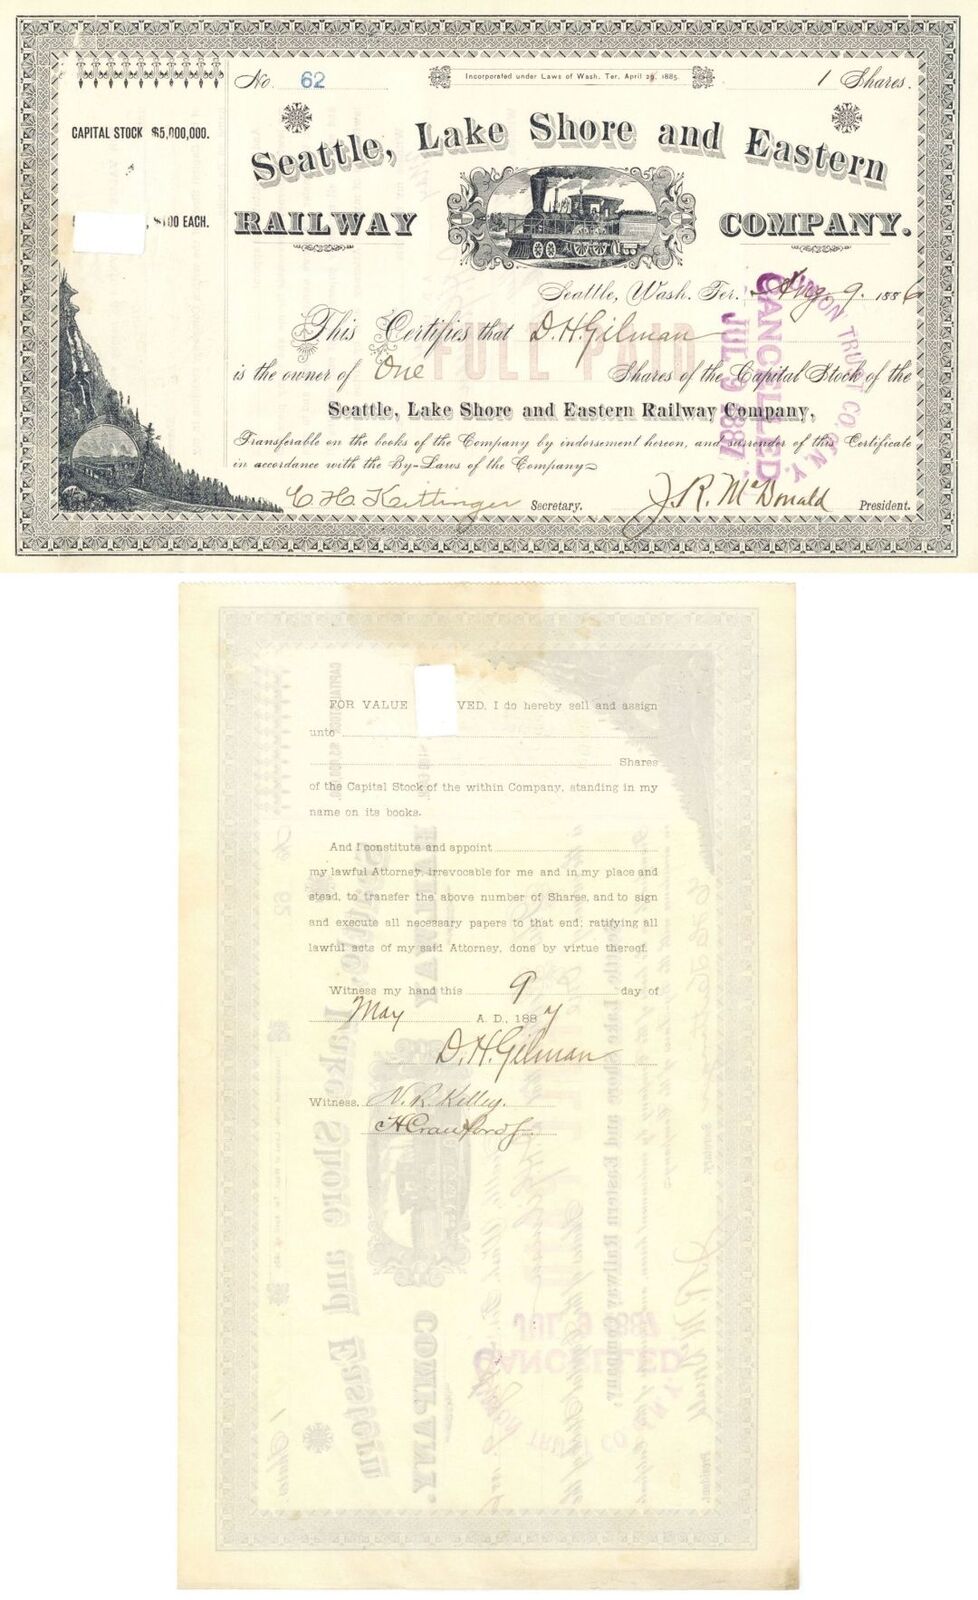 Seattle, Lake Shore and Eastern Railway Co. issued to and signed by Daniel Hunt 